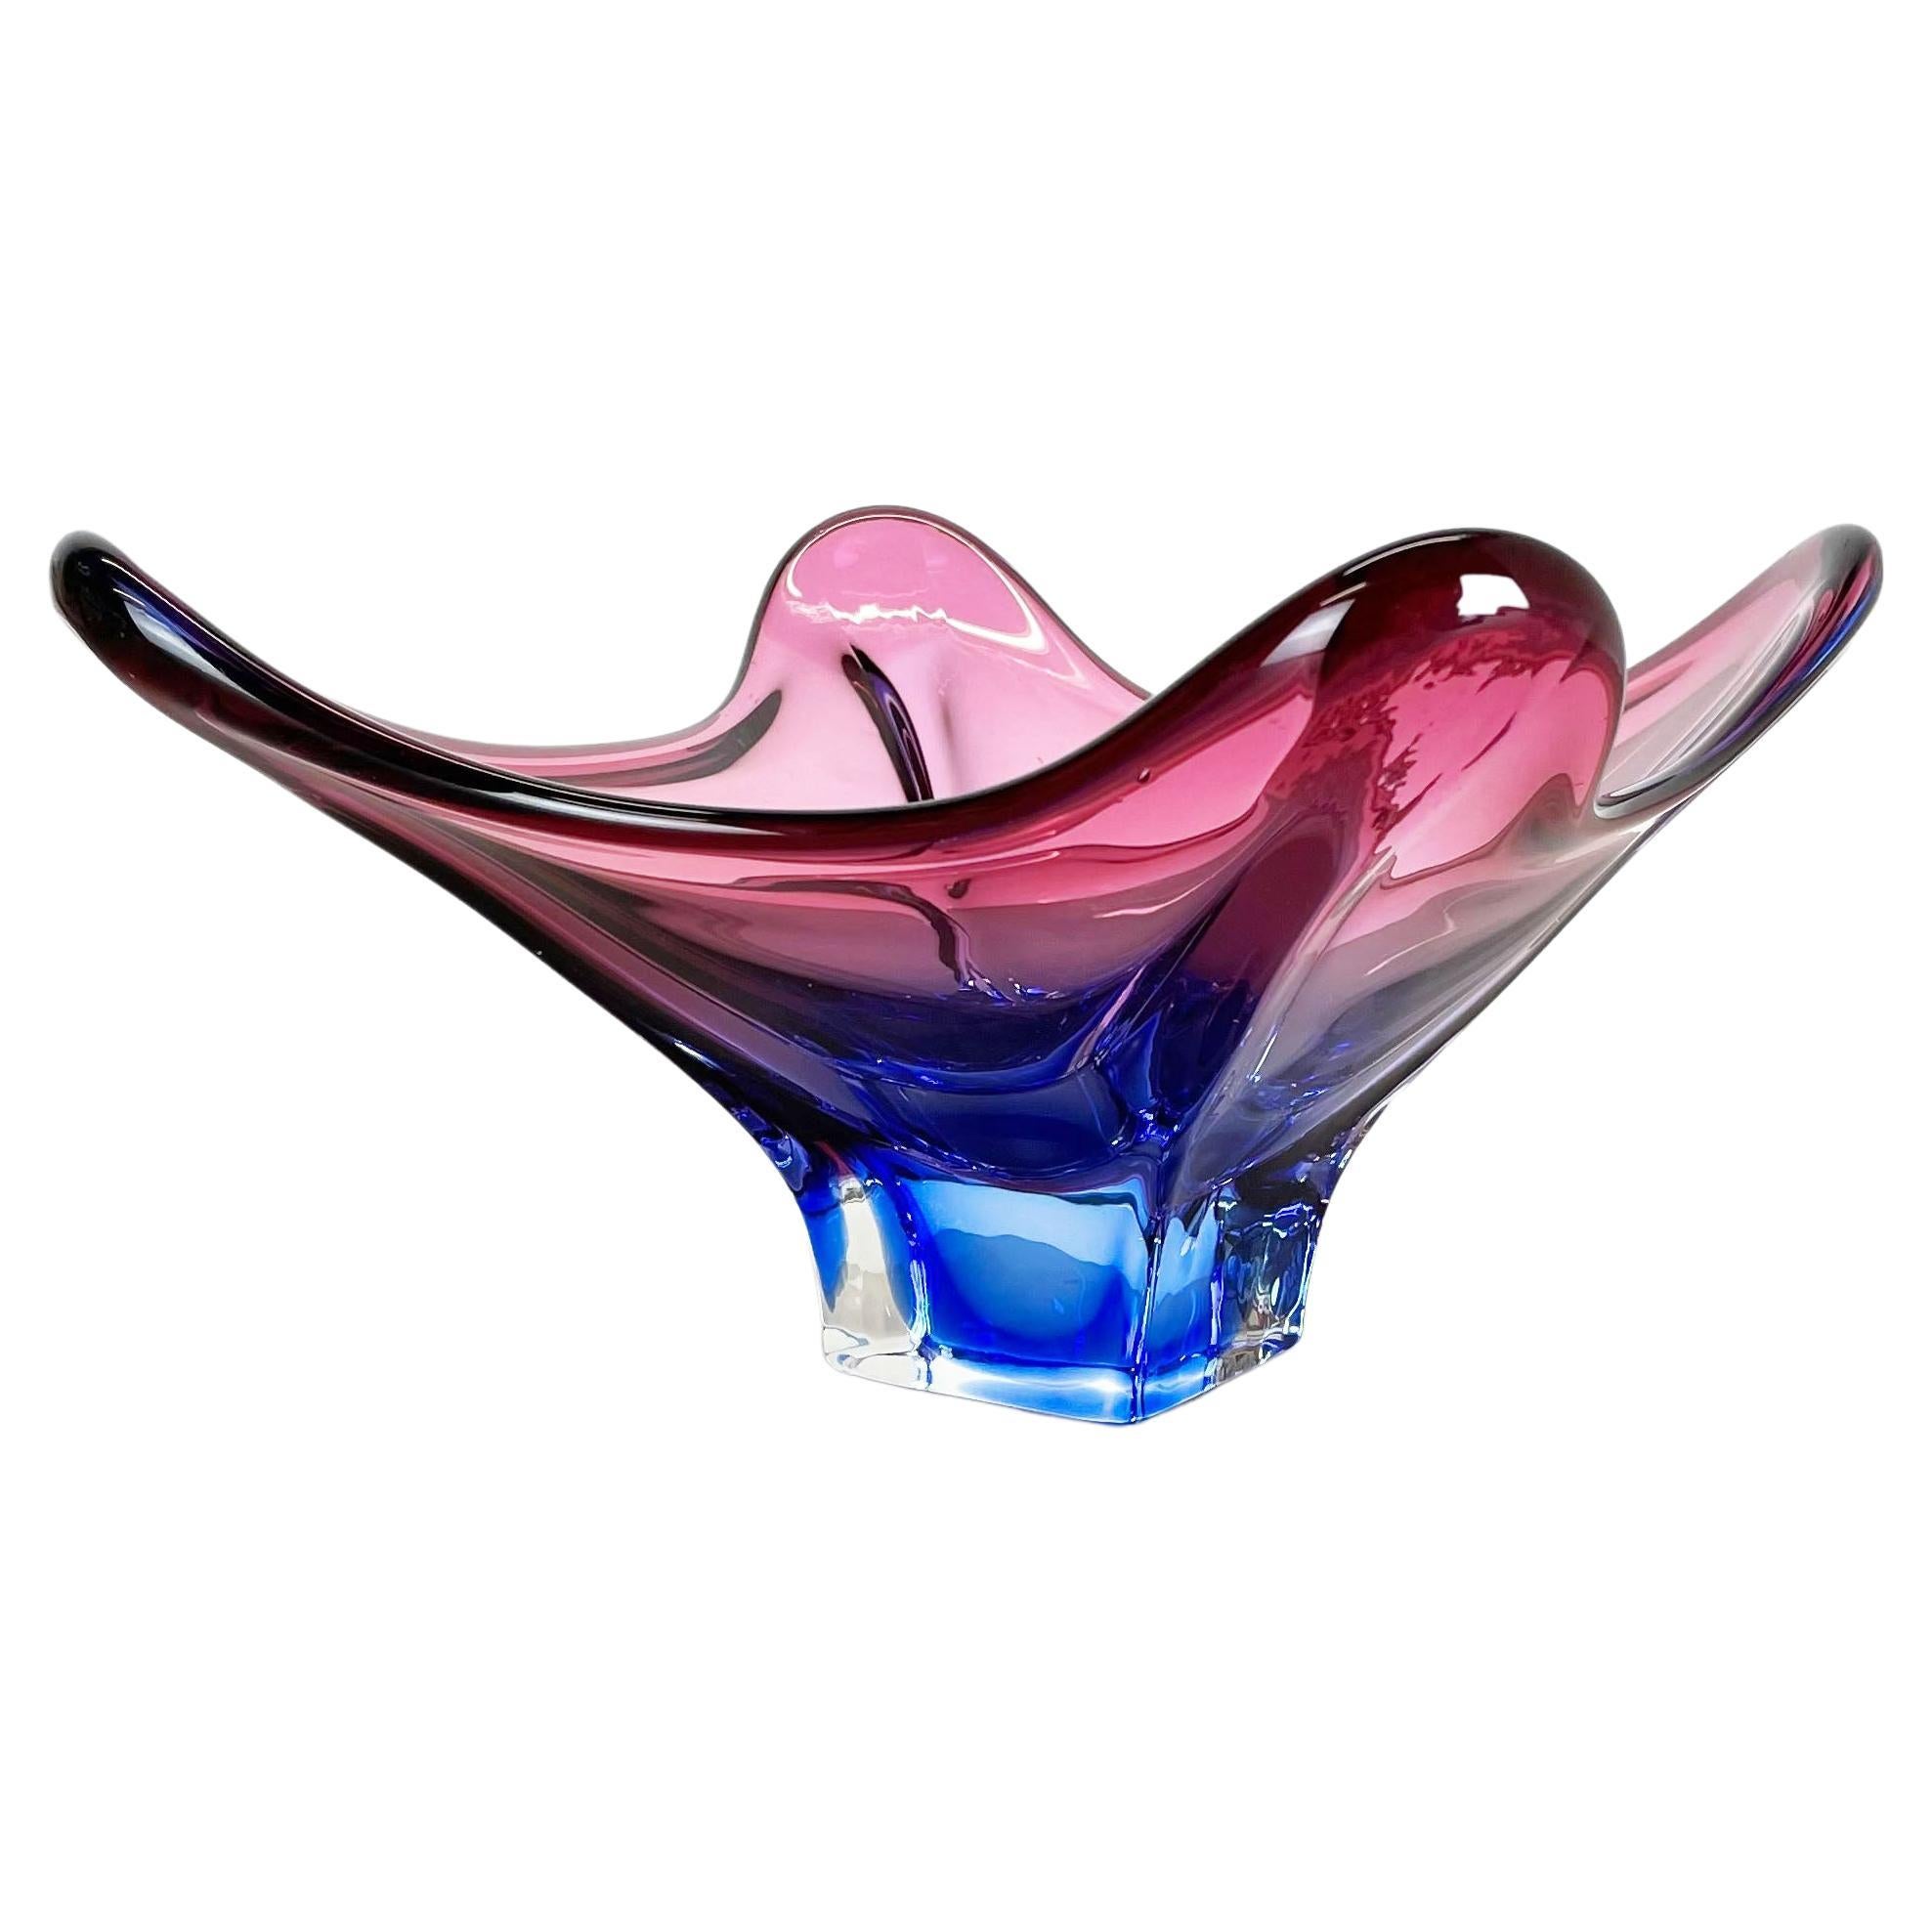 2 Kg Floral Glass Bowl Shell Centerpiece by Fratelli Toso Murano, Italy, 1970s For Sale